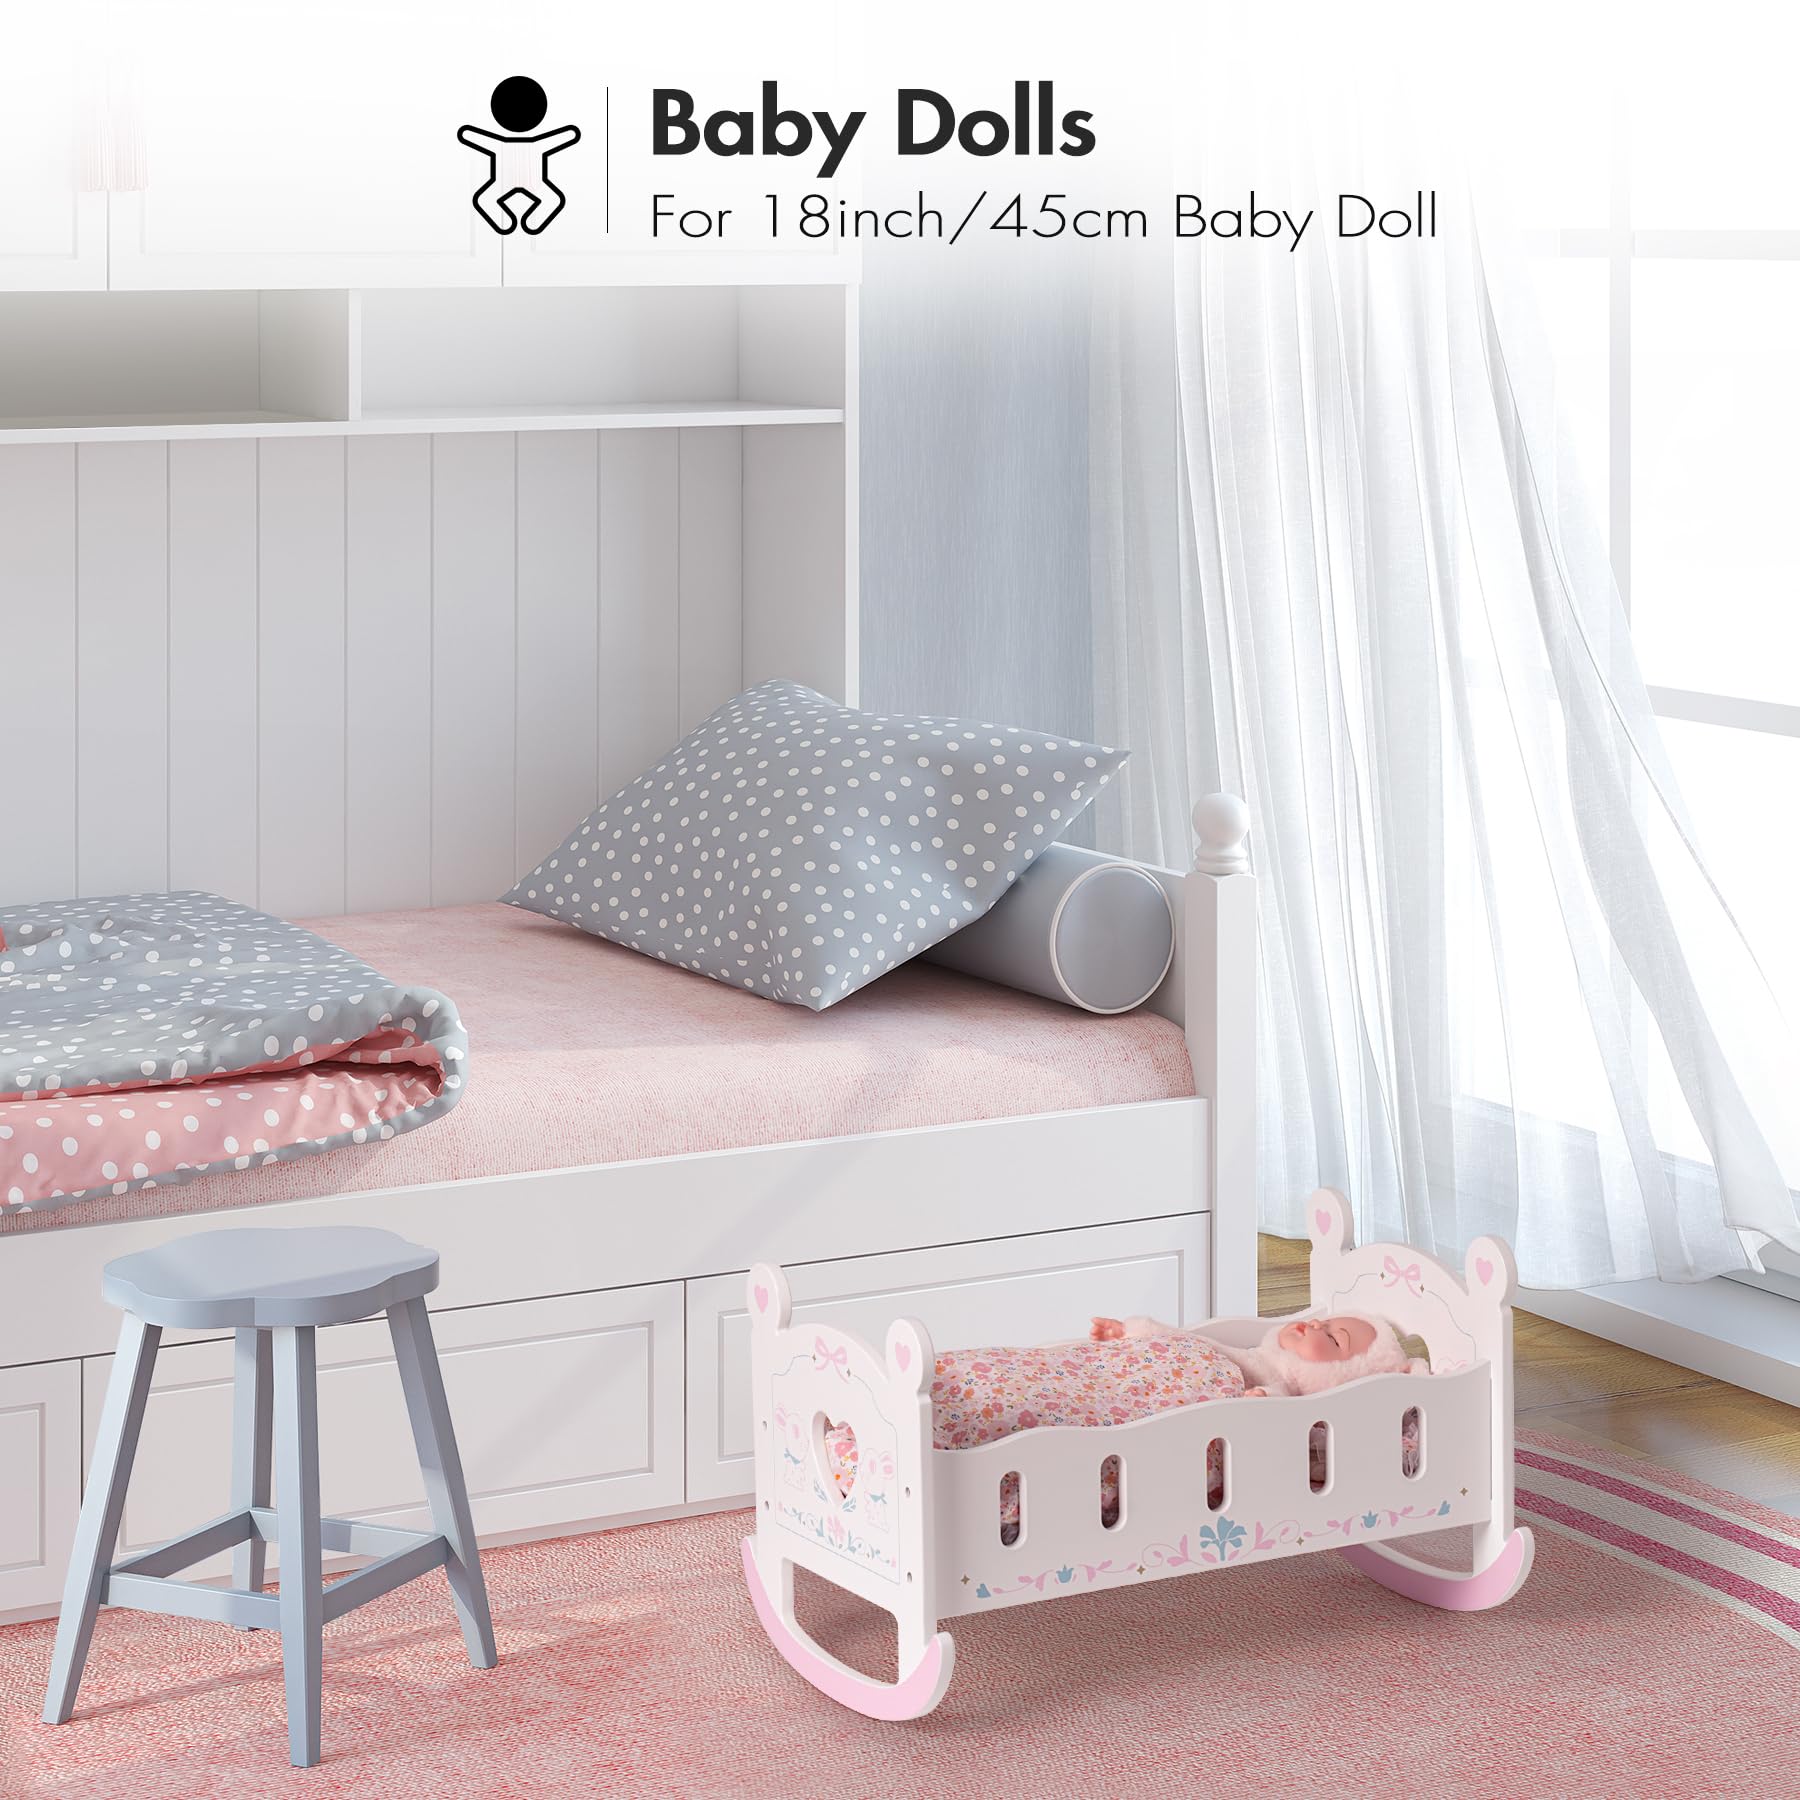 ROBUD Wooden Baby Doll Crib, Baby Doll Bed Toys, for Dolls Up to 18 Inch, Doll Accessories - with Pad